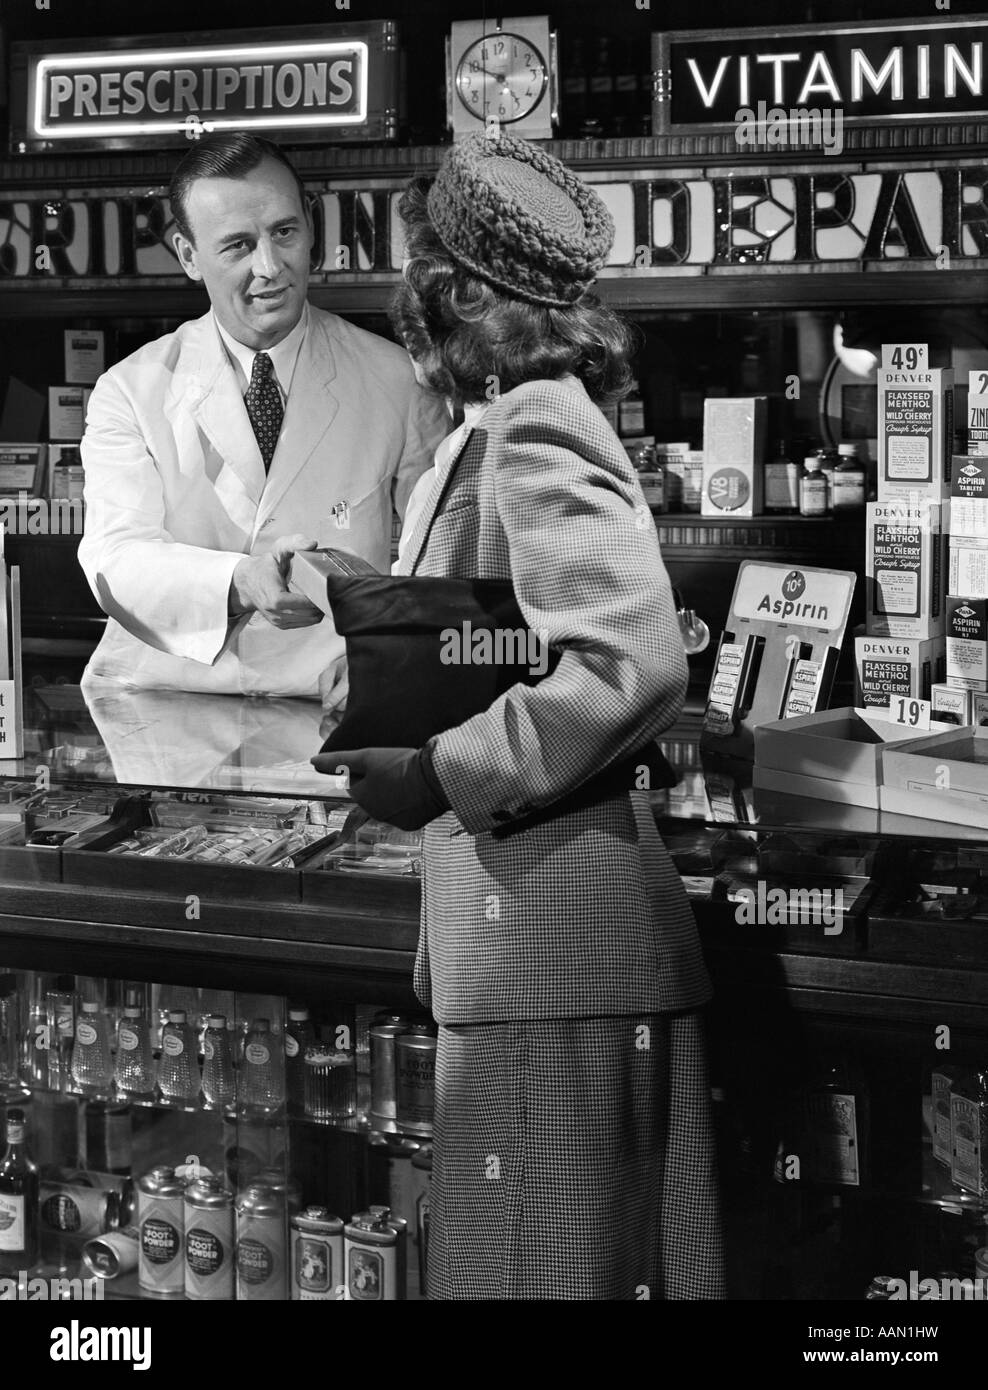 1940s 1950s WOMAN FROM BEHIND ACCEPTING BOX FROM MAN PHARMACIST AT DRUG COUNTER PHARMACY Stock Photo